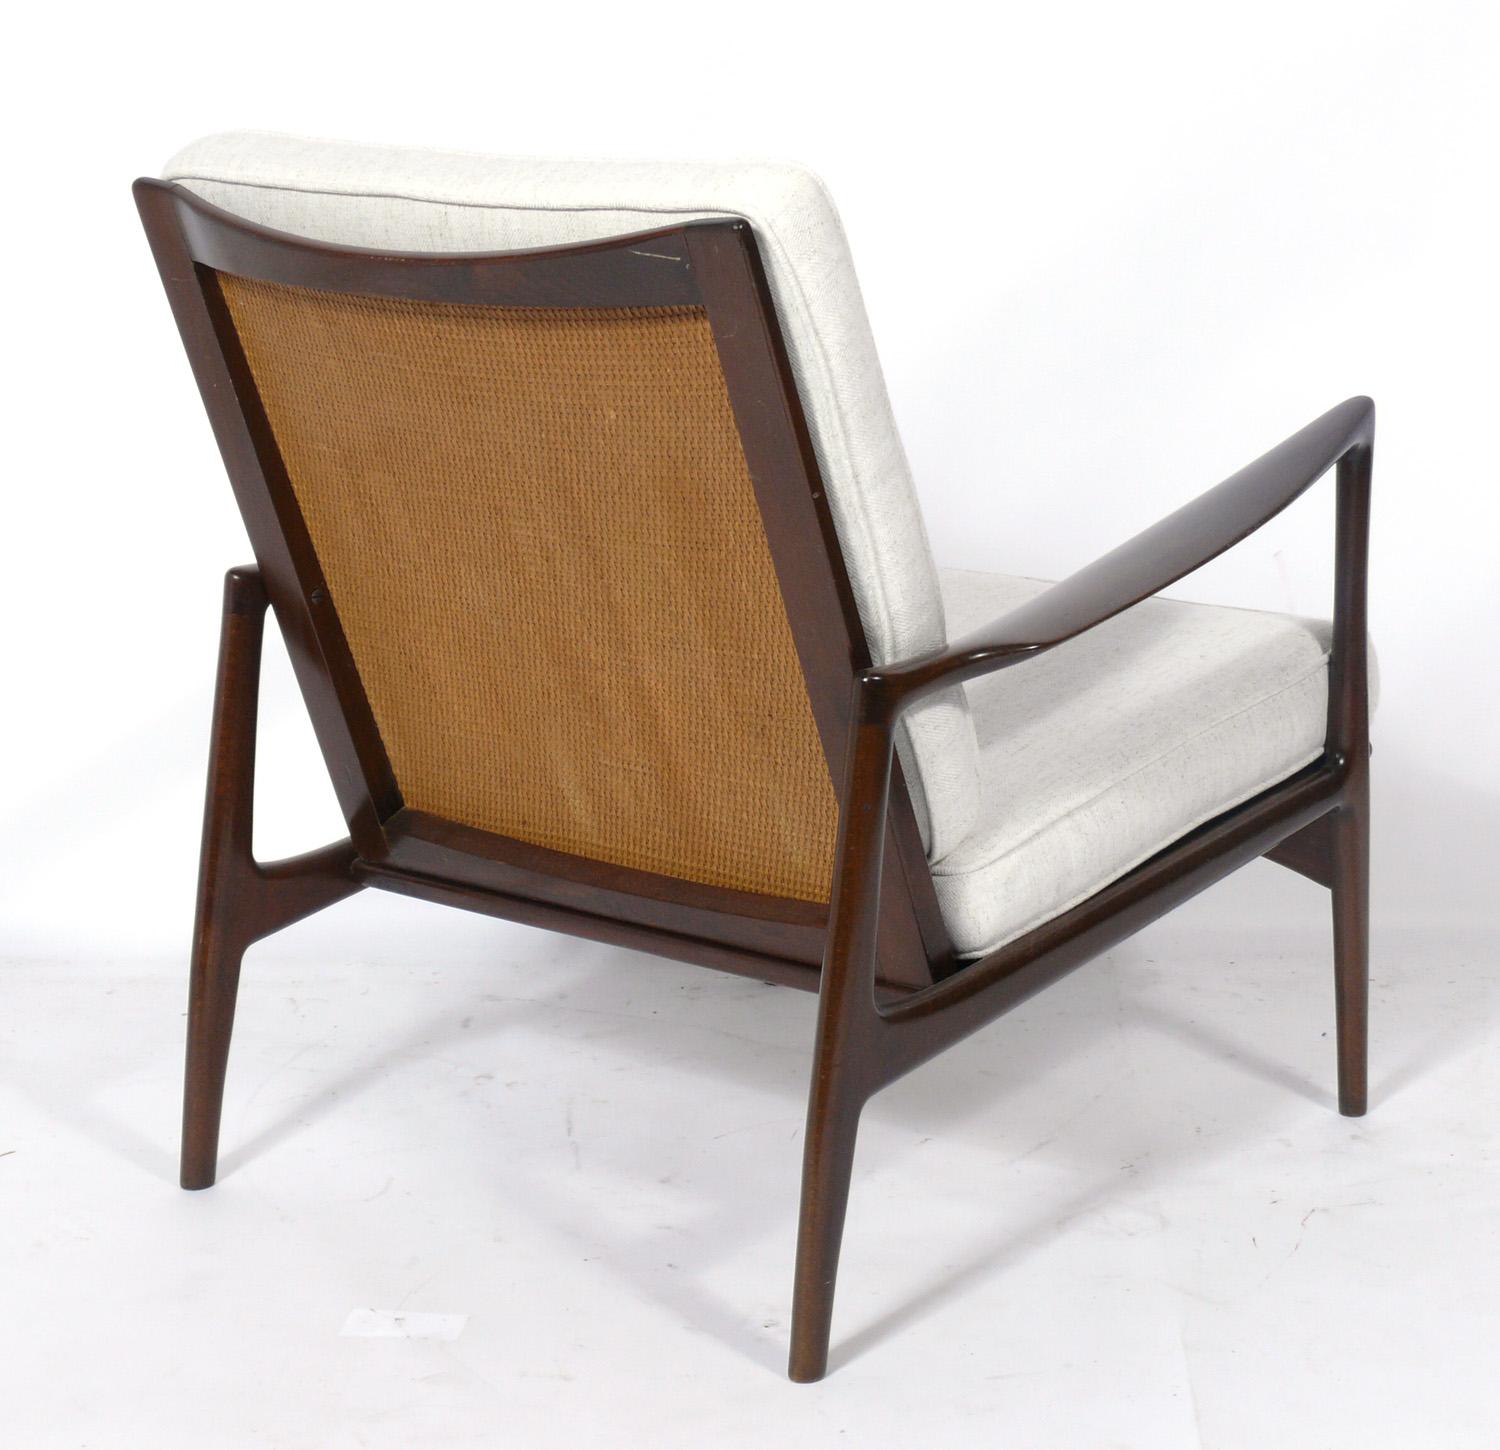 Danish modern caned back lounge chair, designed by Ib Kofod Larsen for Selig, Denmark, circa 1960s. It has been cleaned and Danish oiled. It has recently been reupholstered in a ivory color herringbone upholstery with new foam cushions.